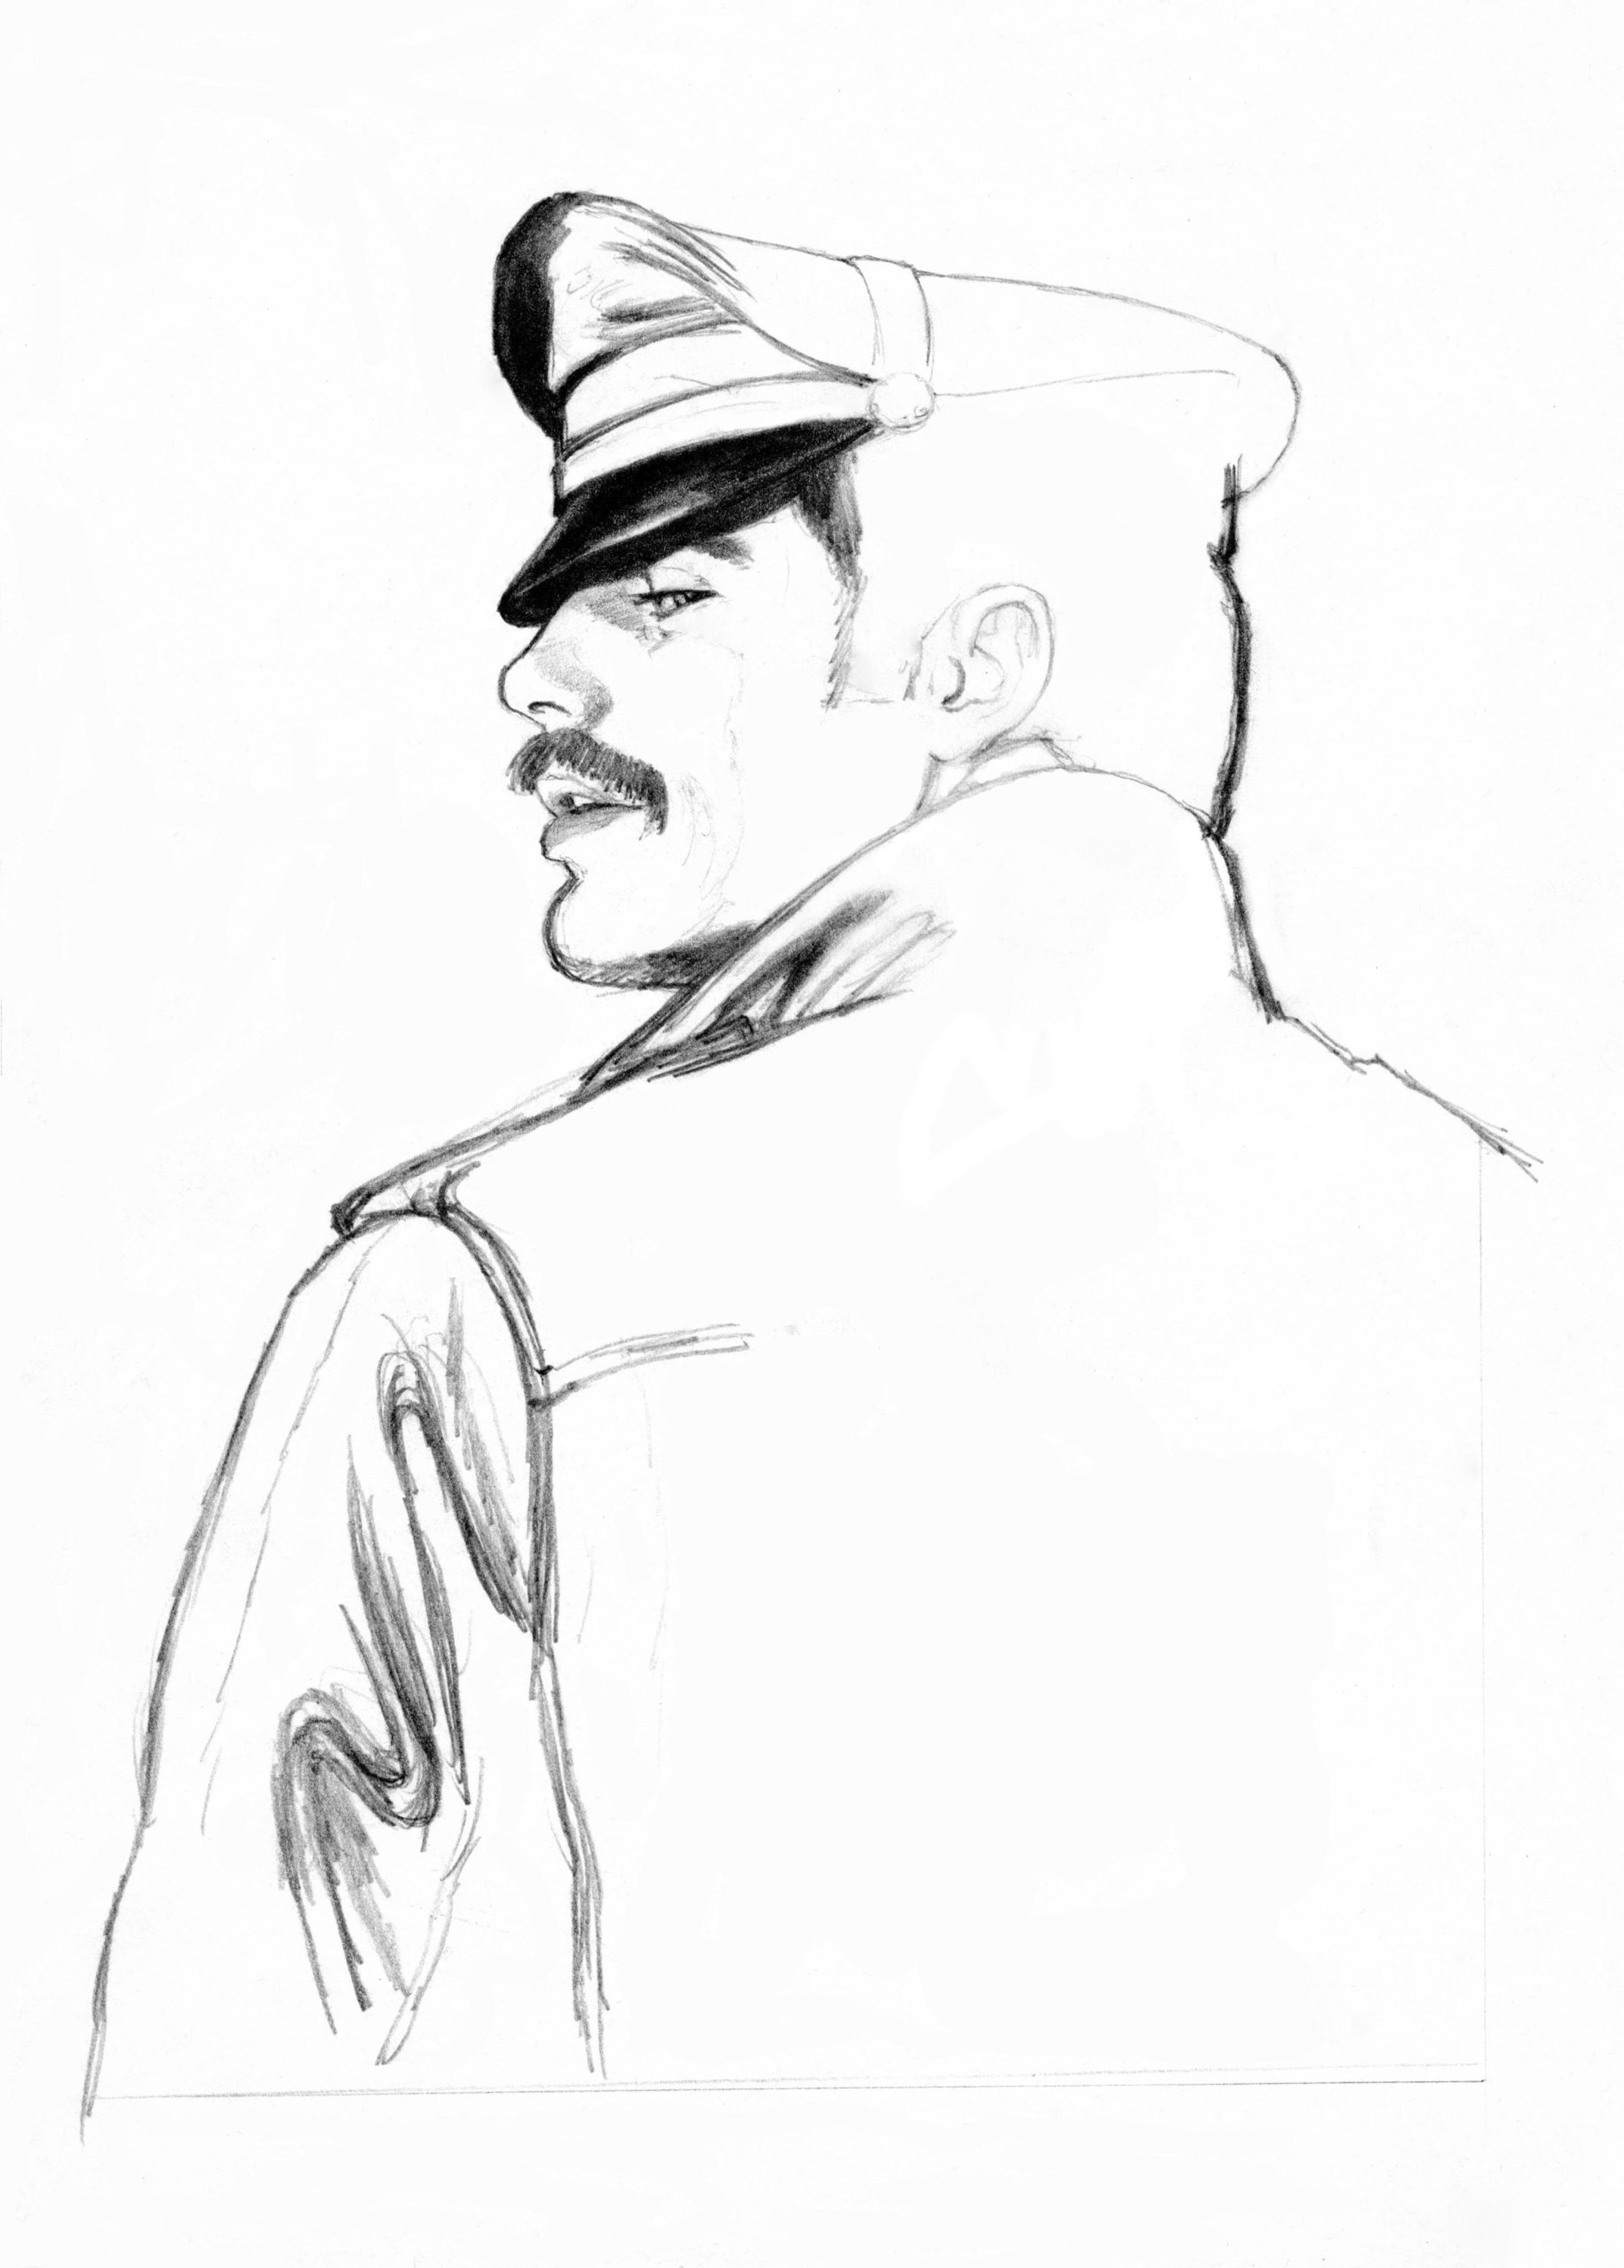 A black and white photographic artwork of a man in uniform's side profile